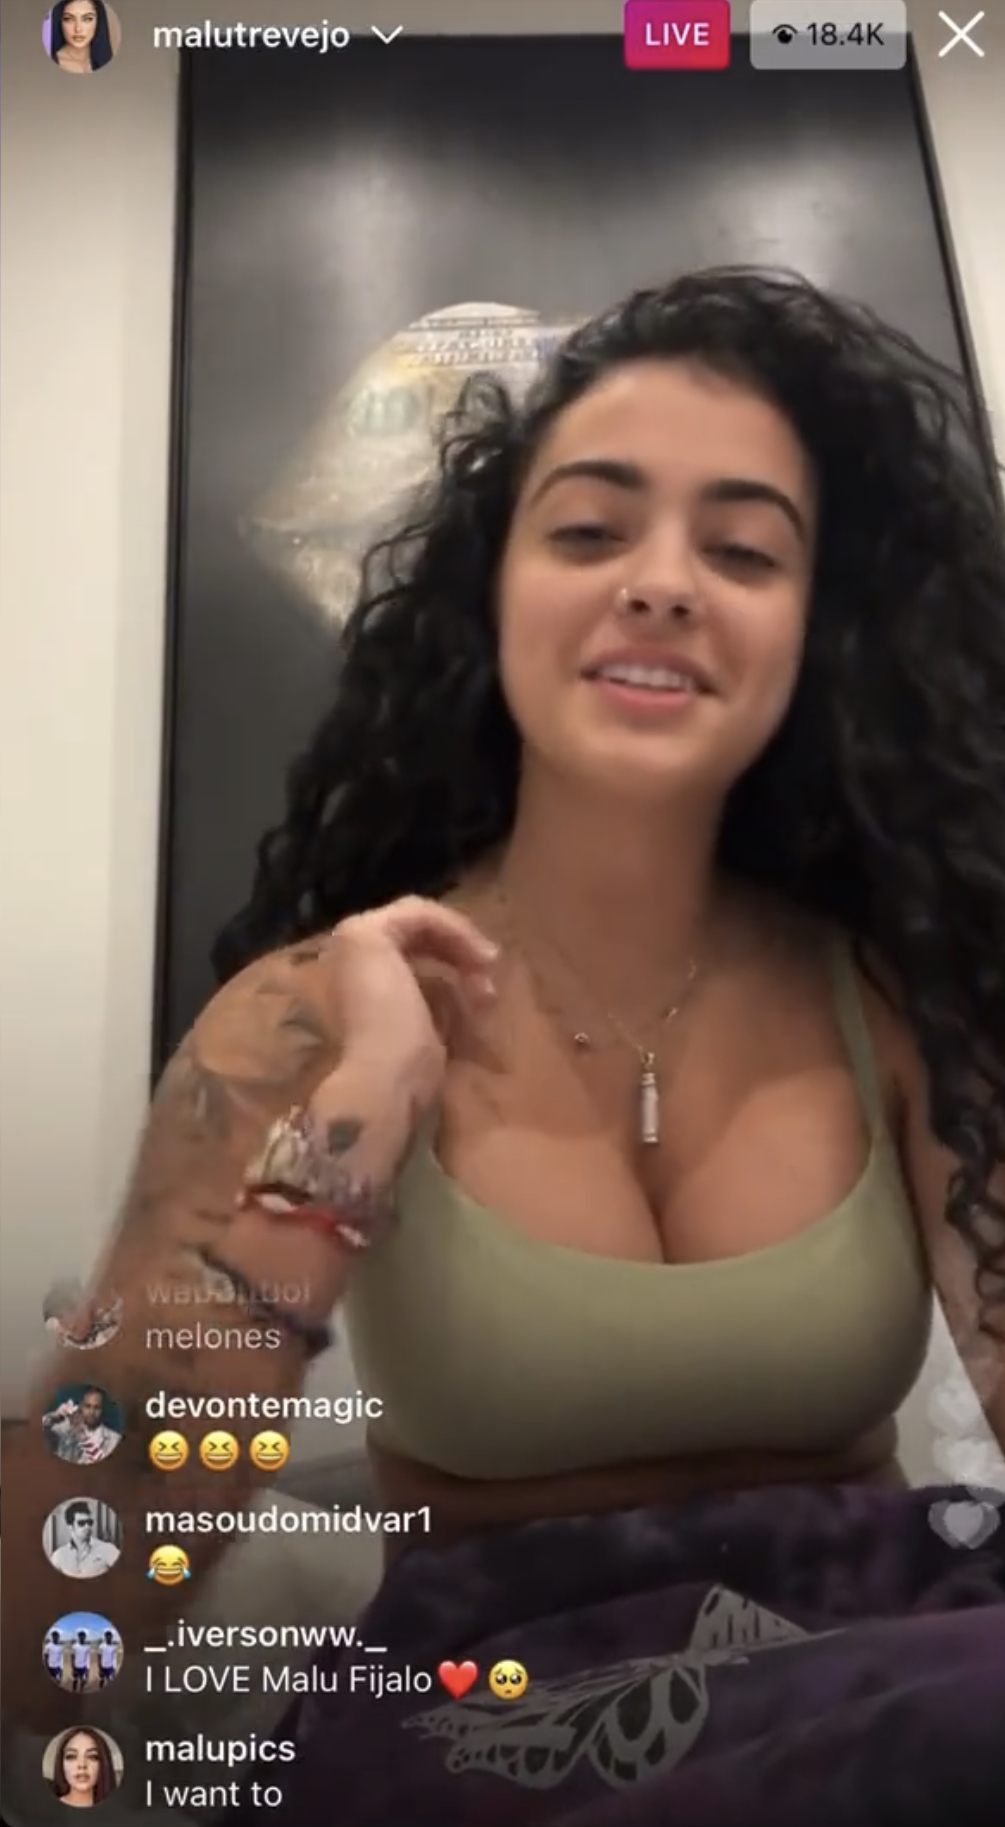 Malu Trevejo and lovely peaches viral video